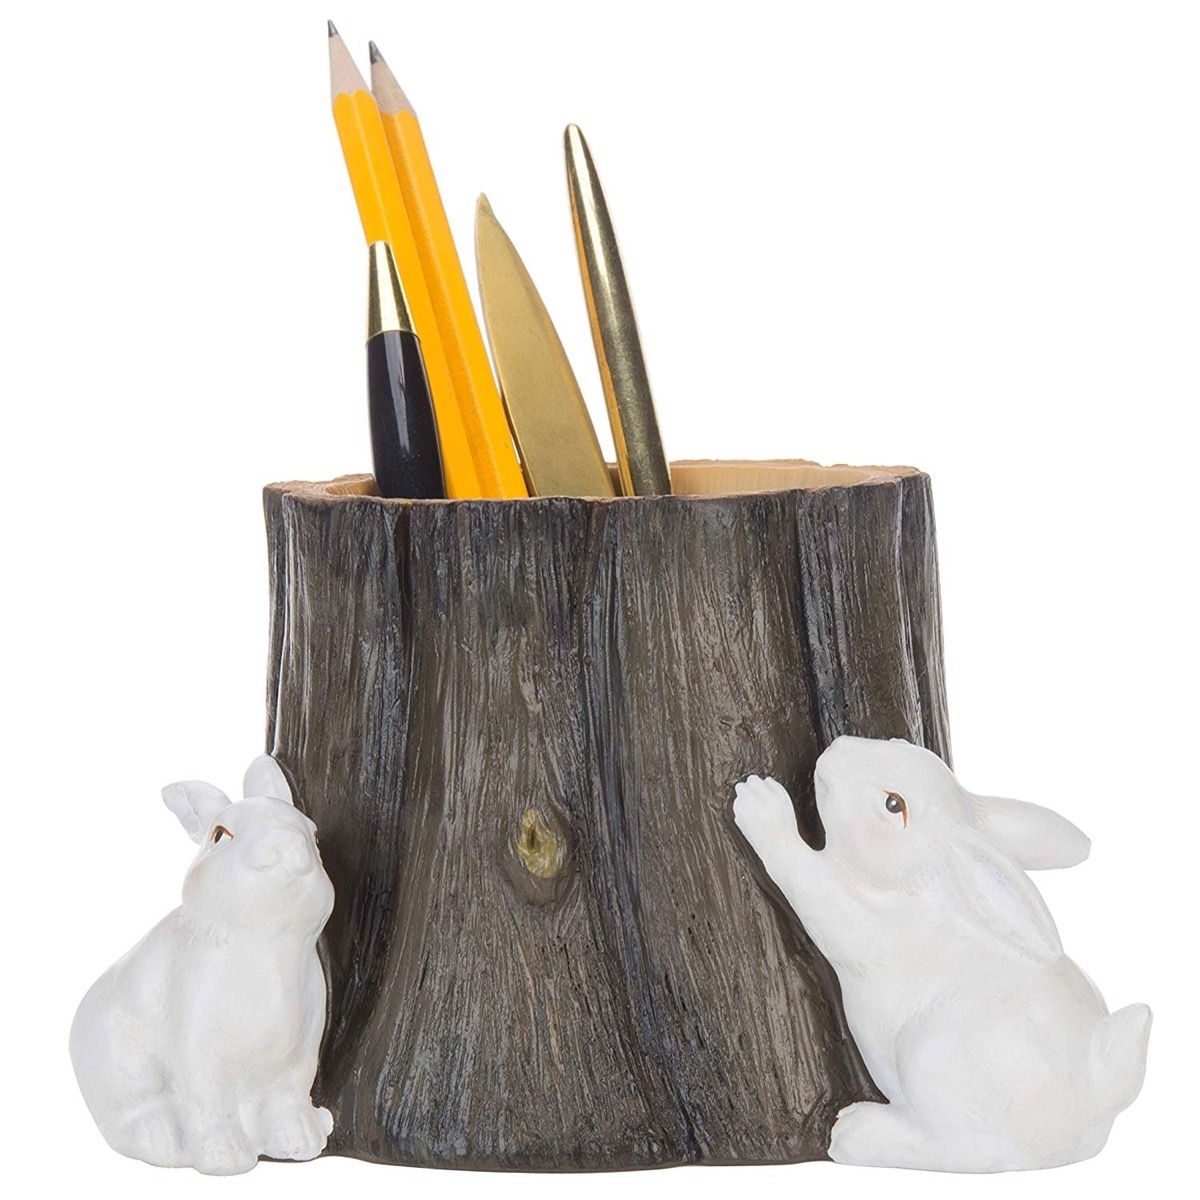 fake tree stump pen holder with white bunnies next to it and pencils inside